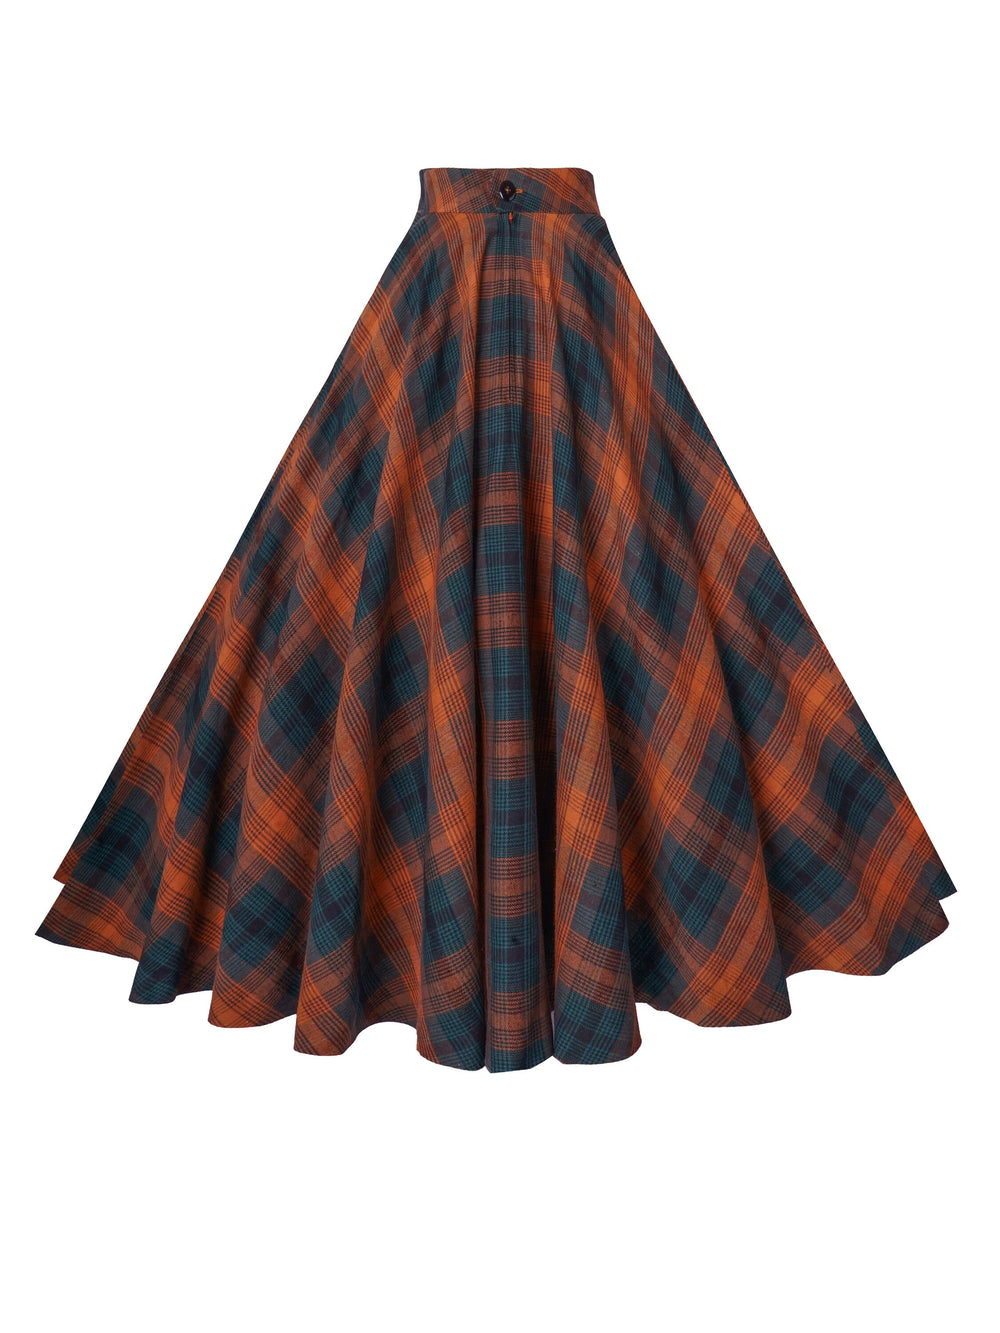 MTO - Lindy Skirt in "Hunters Plaid"